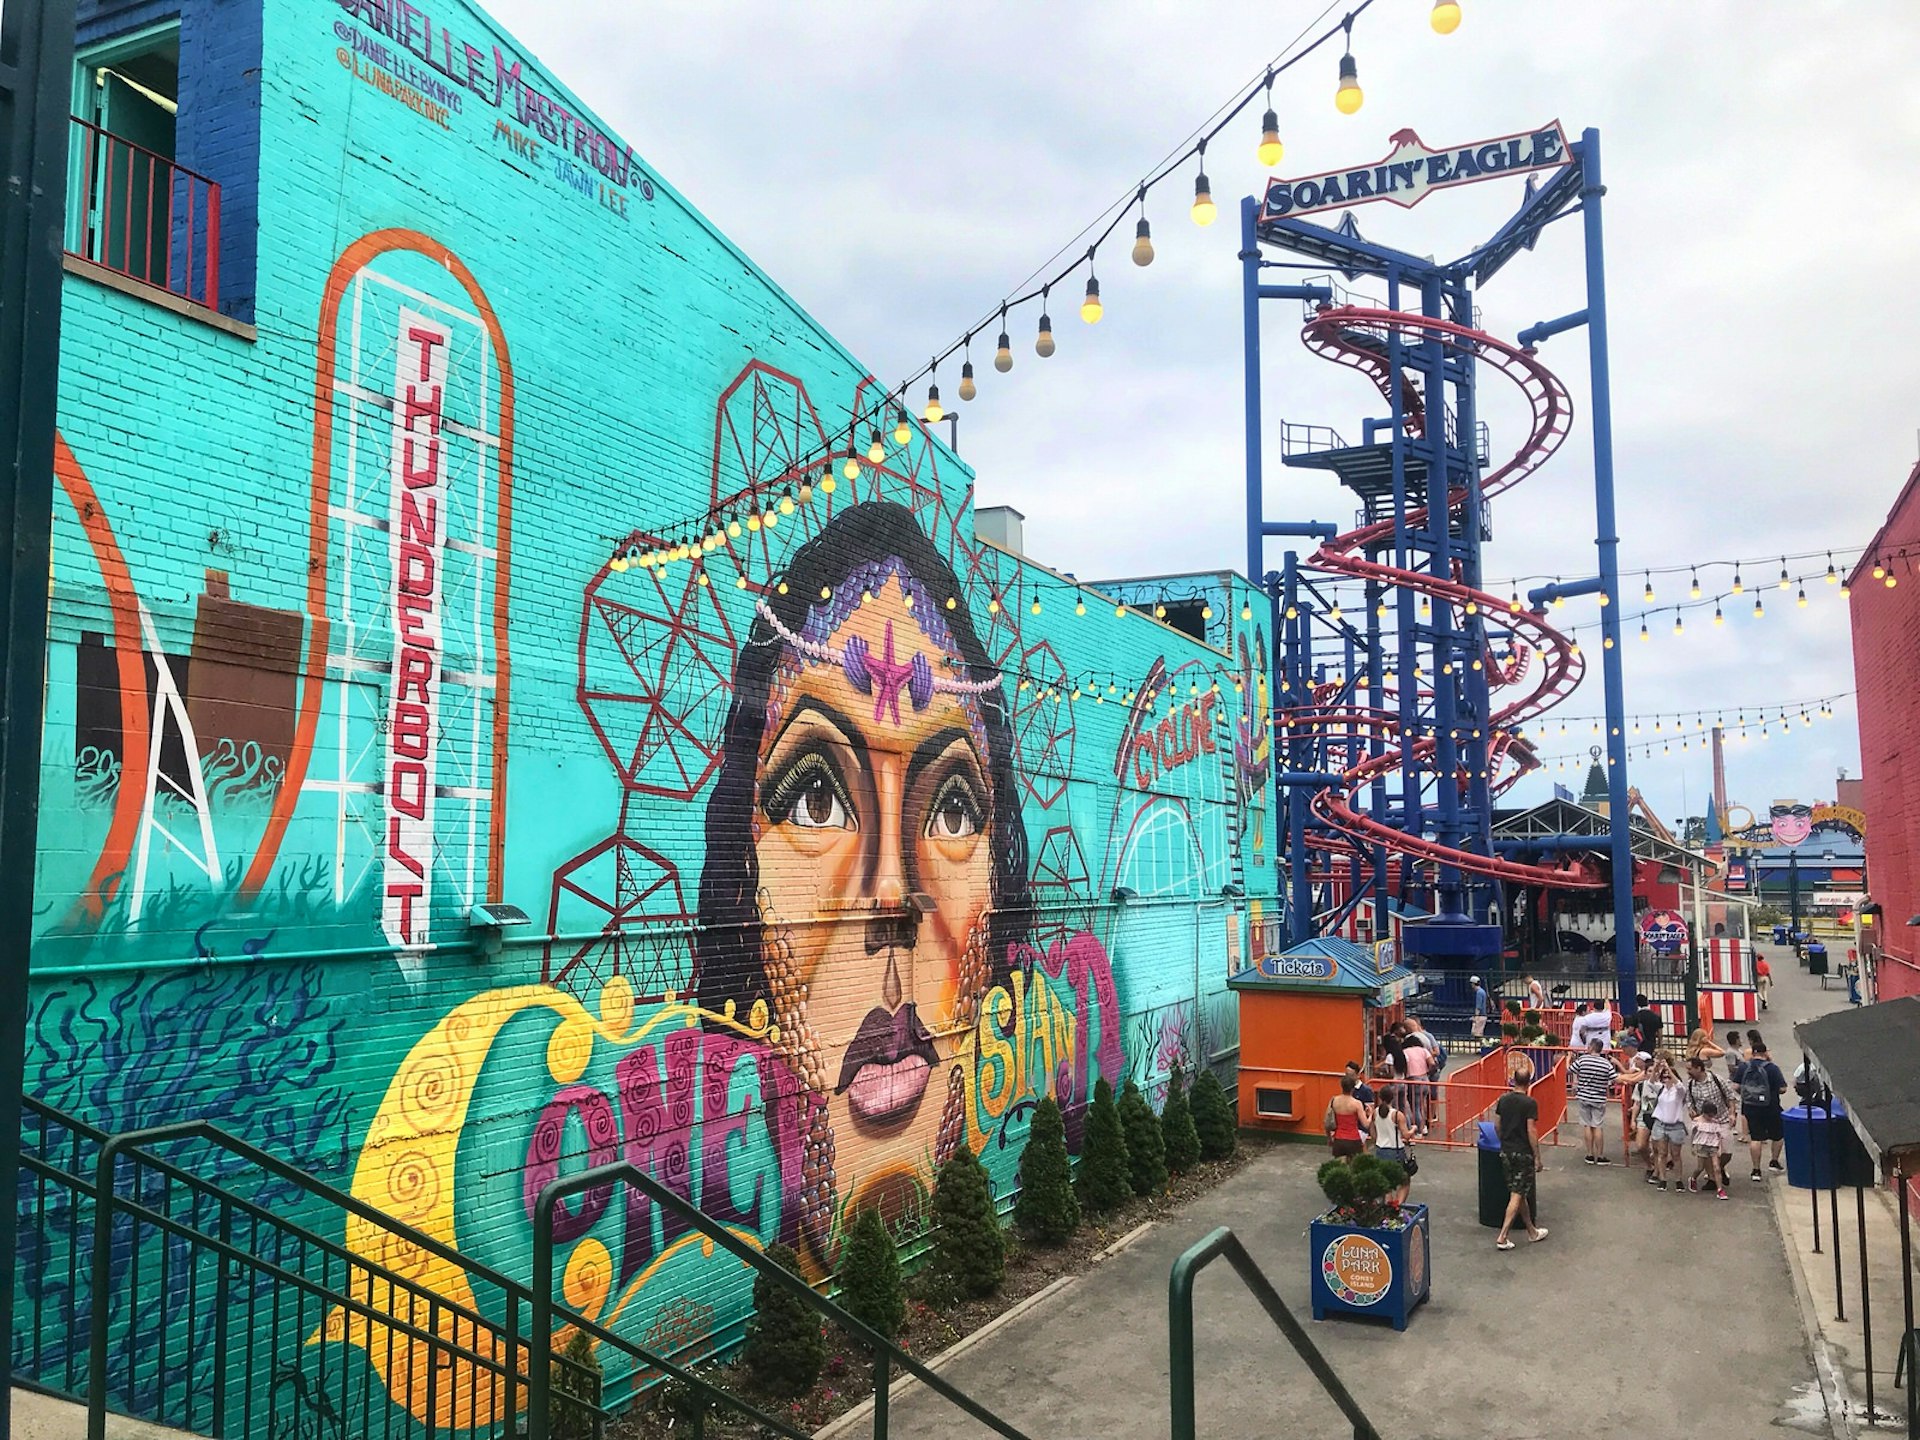 A vibrant street art mural on a woman's face covers he side of a brick wall that is coloured aquamarine; in the background is an amusement ride